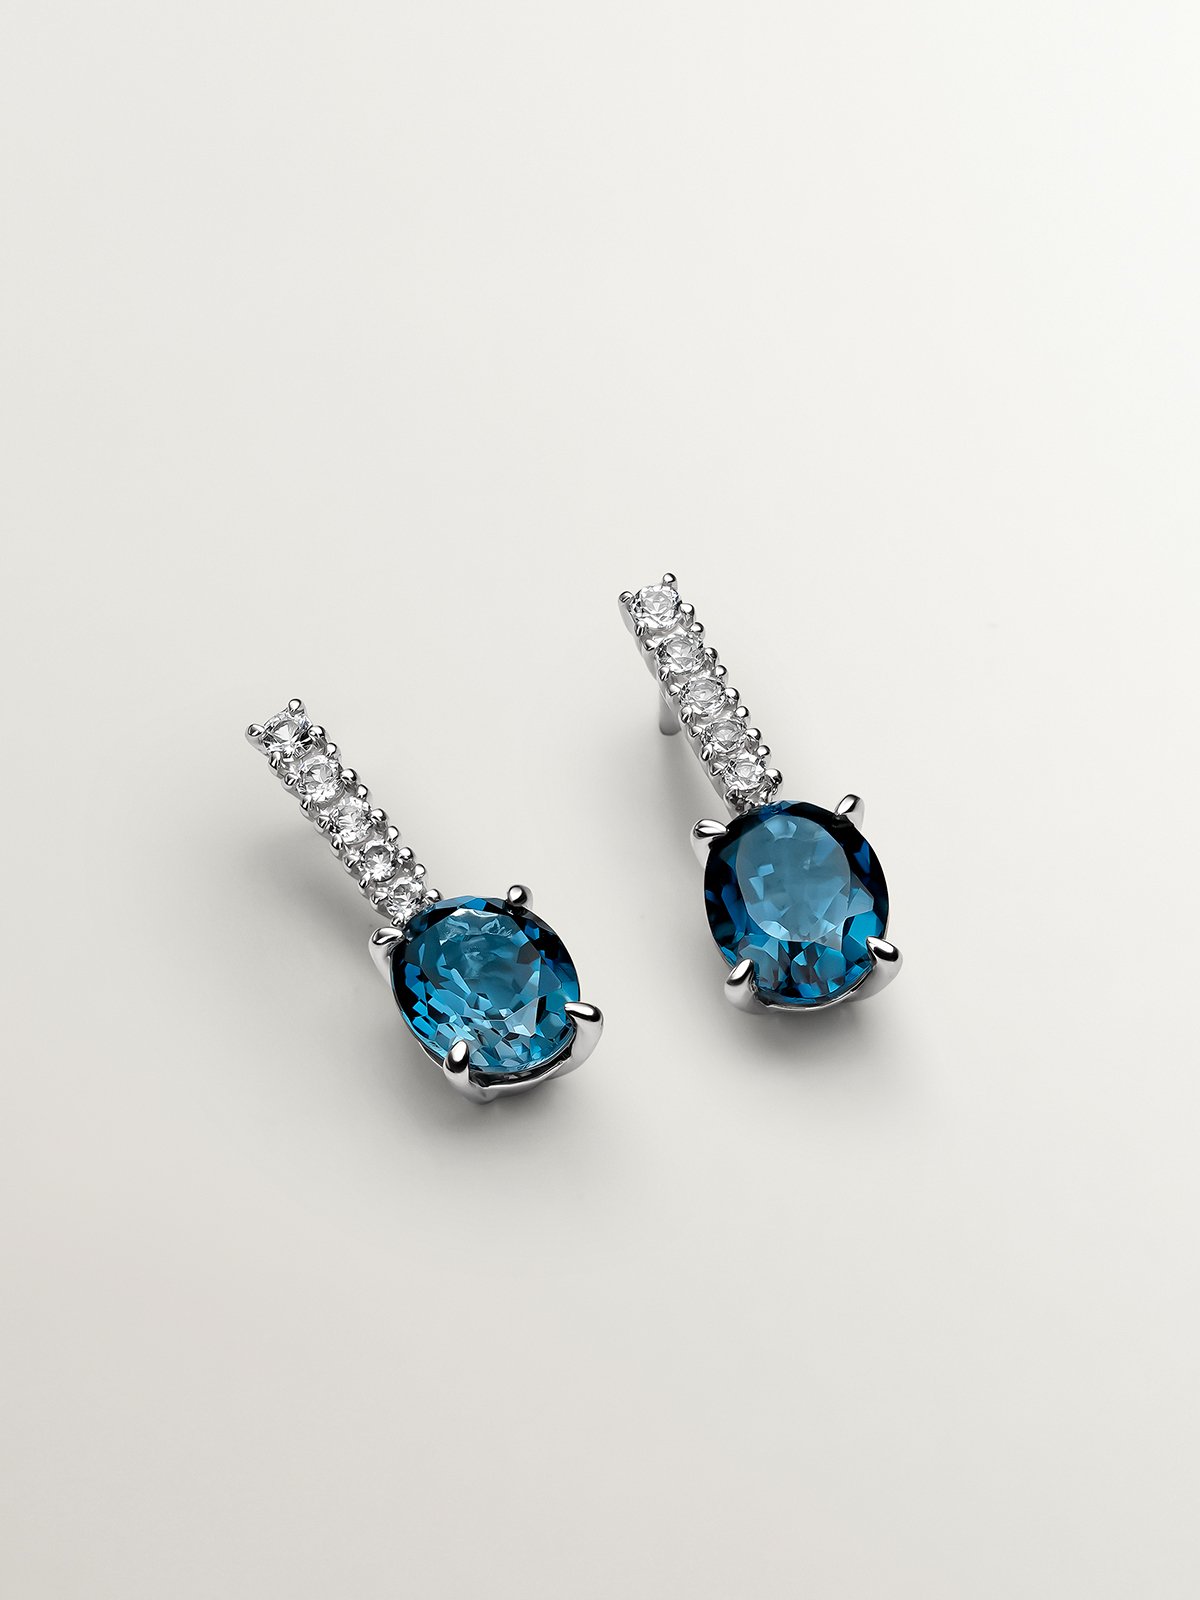 925 Silver Earrings with White and London Blue Topaz